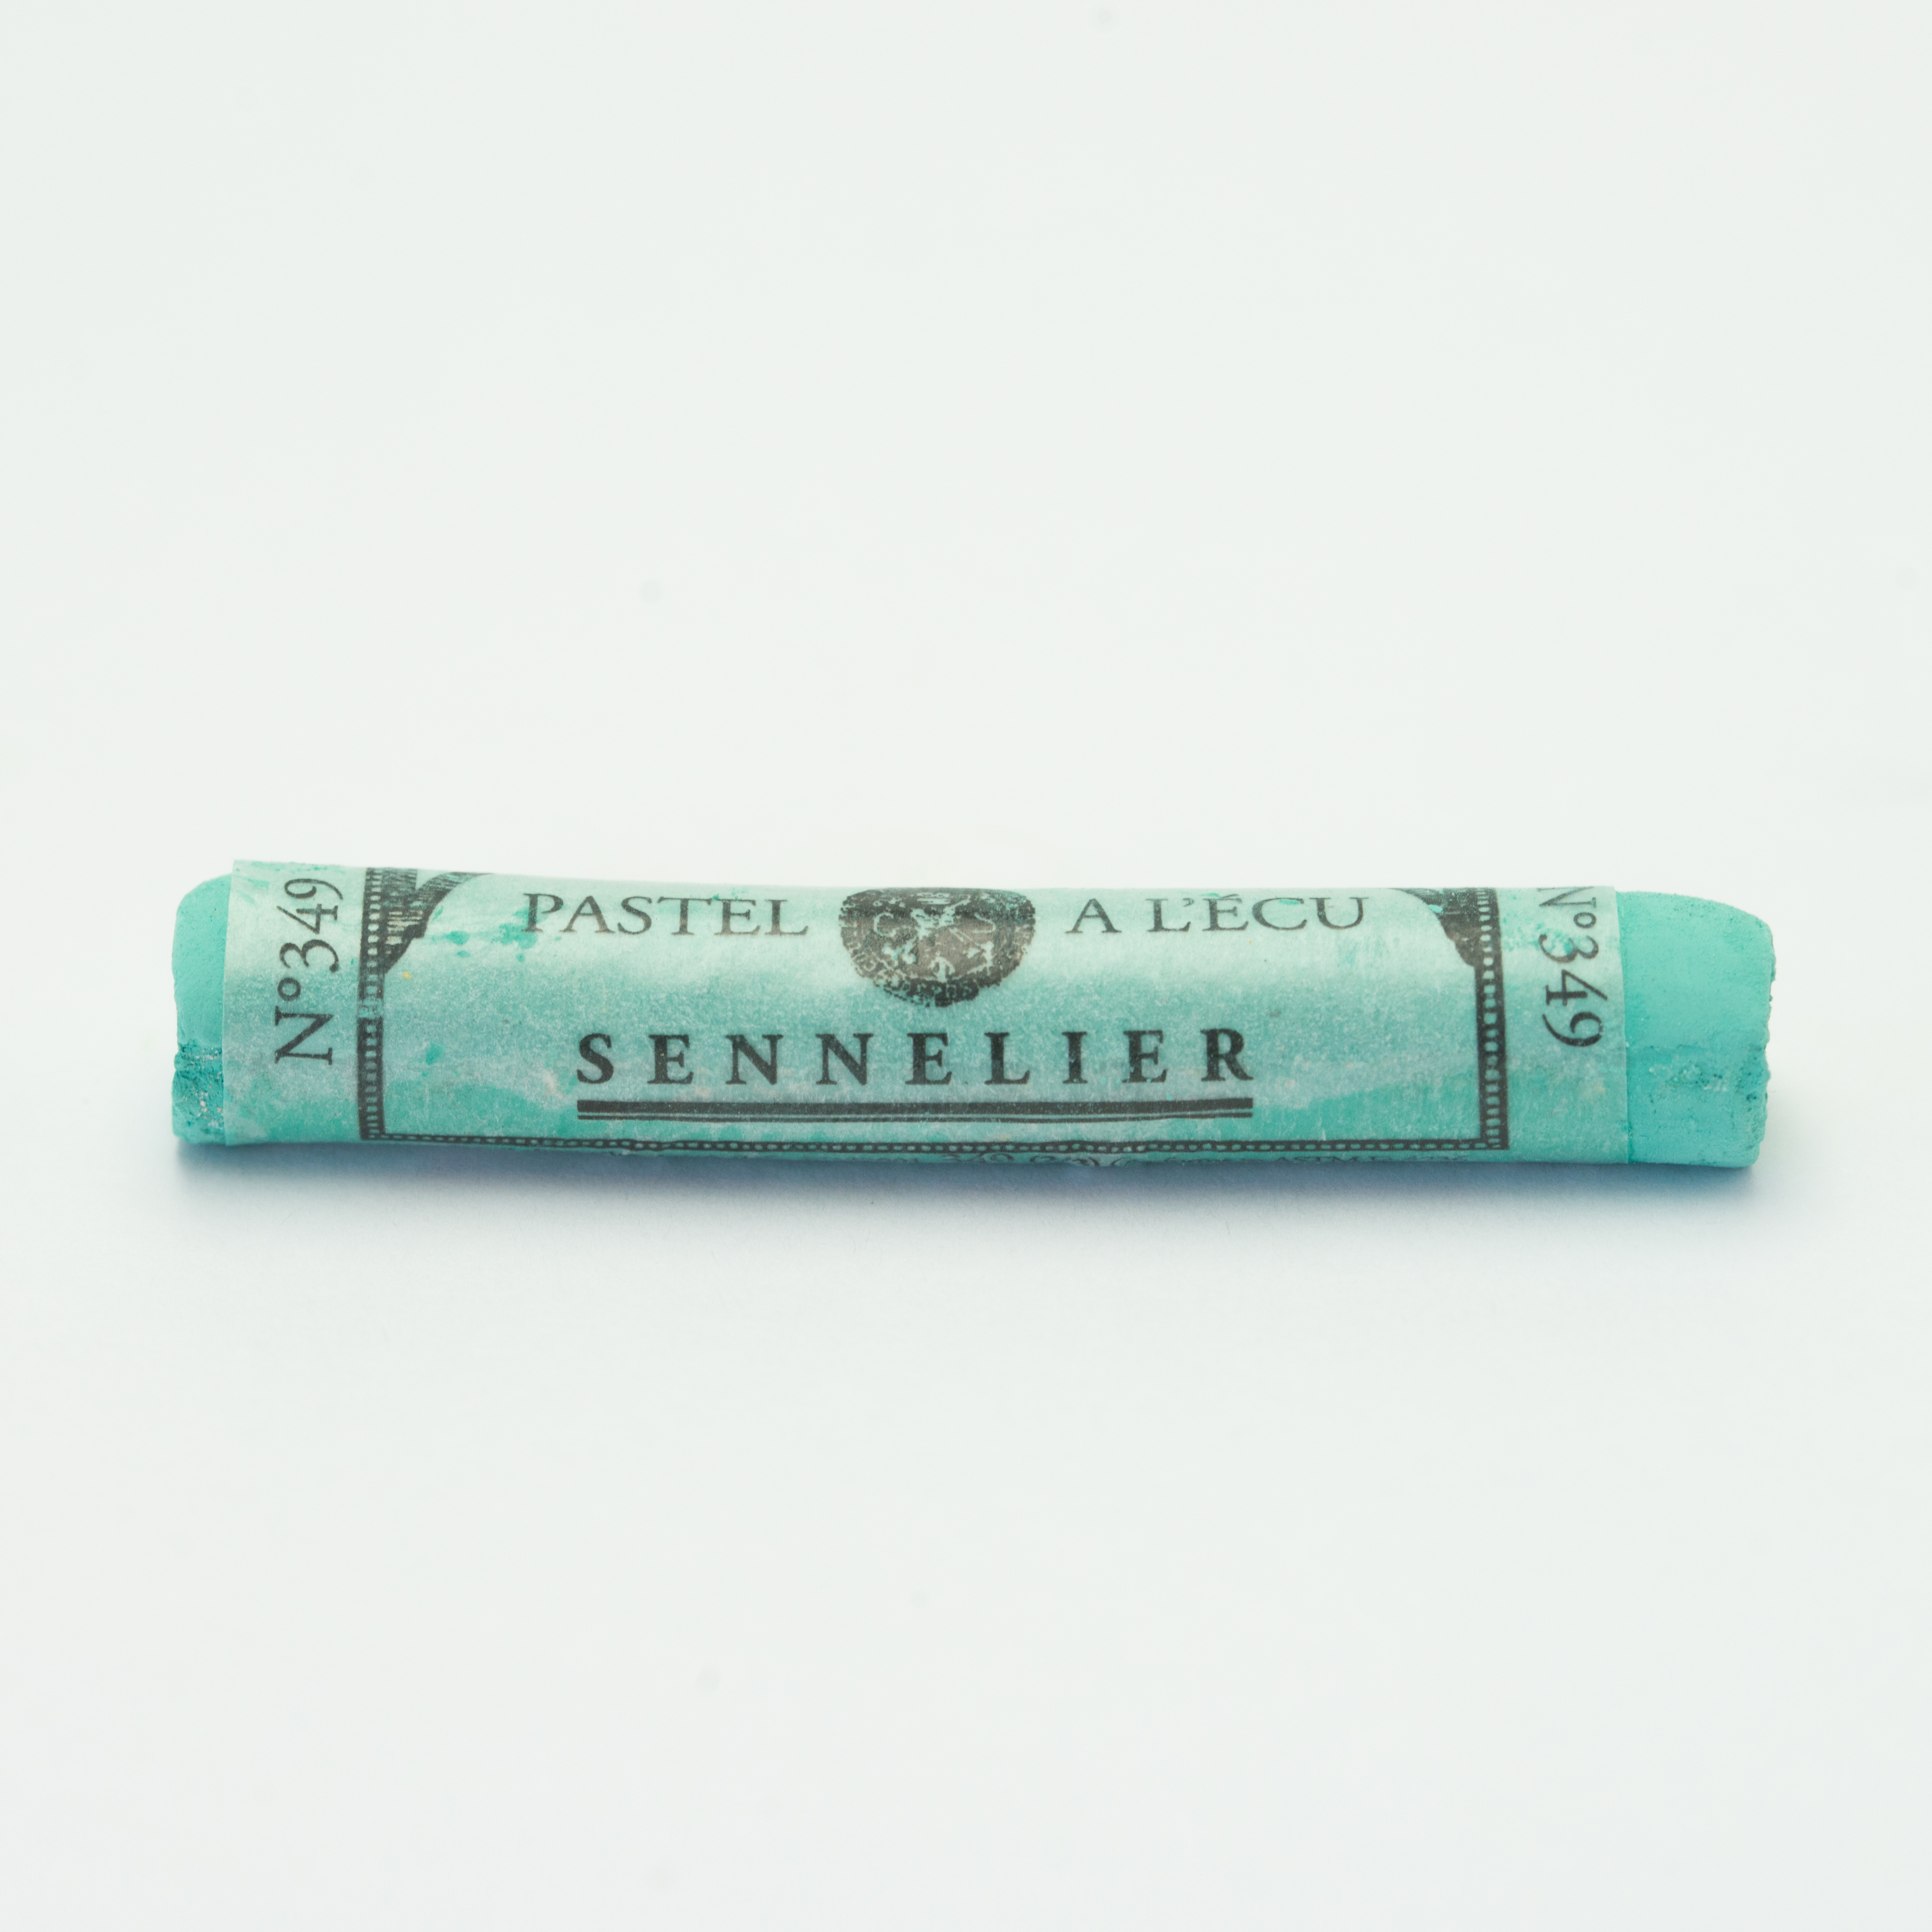 Sennelier Extra Soft Pastels - Cinereous Green 349